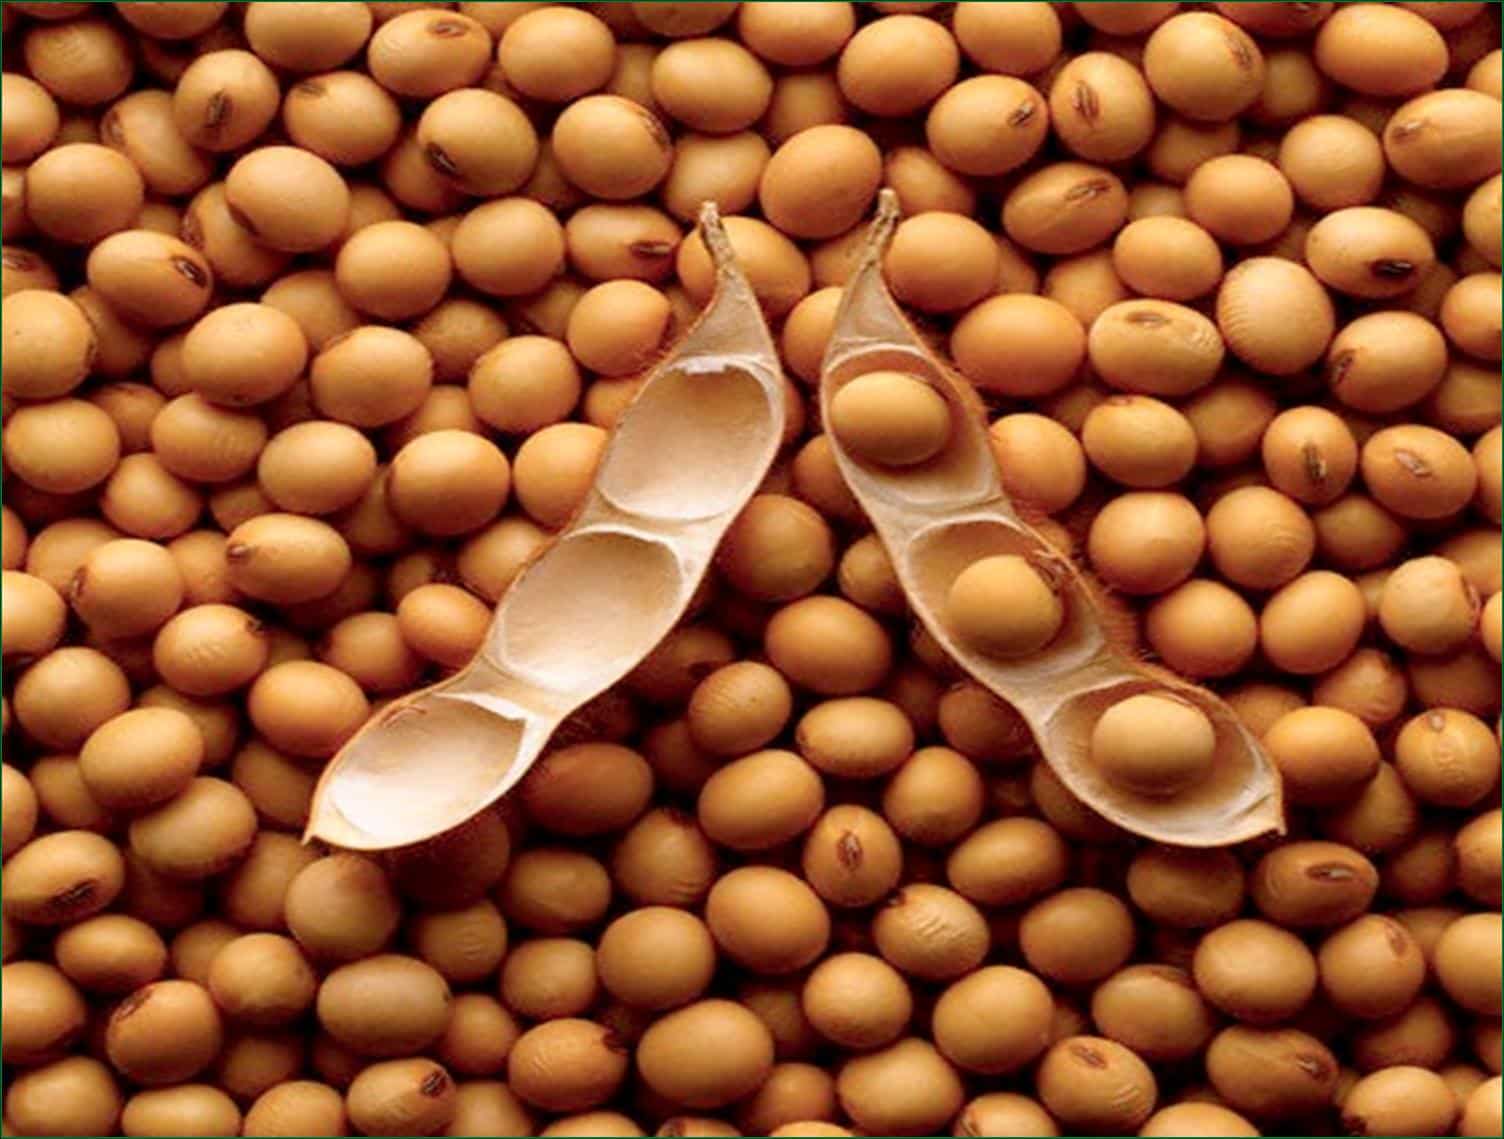 soybeans-and-meaningless-marriage-voice-in-the-wilderness